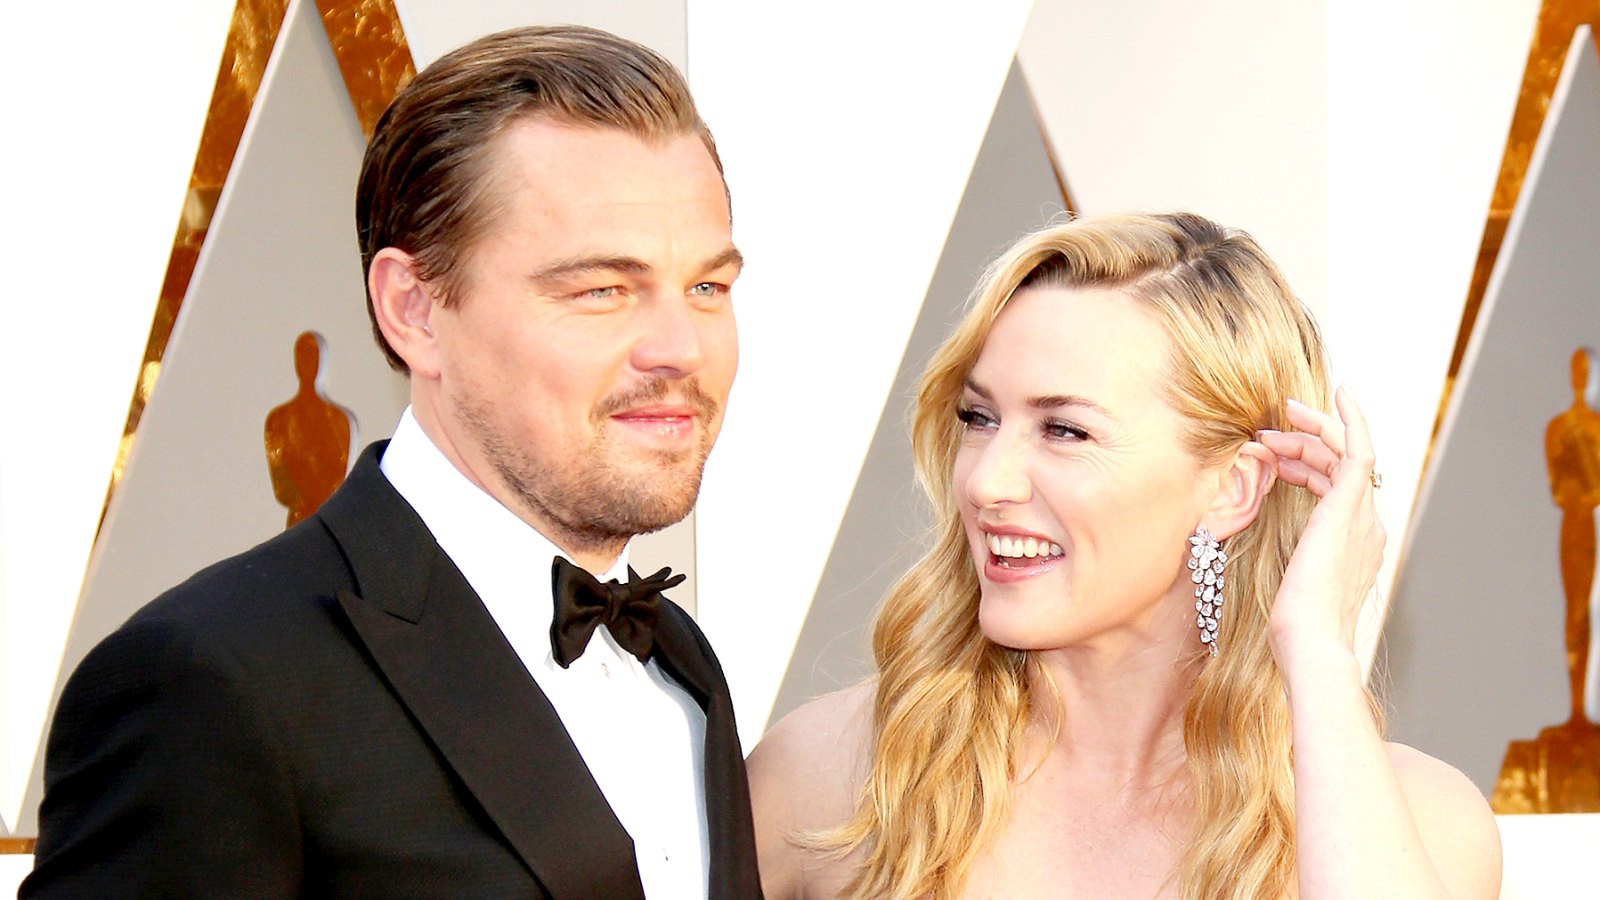 Leonardo DiCaprio and Kate Winslet attend the 88th Annual Academy Awards at Hollywood & Highland Center on February 28, 2016 in Hollywood, California.